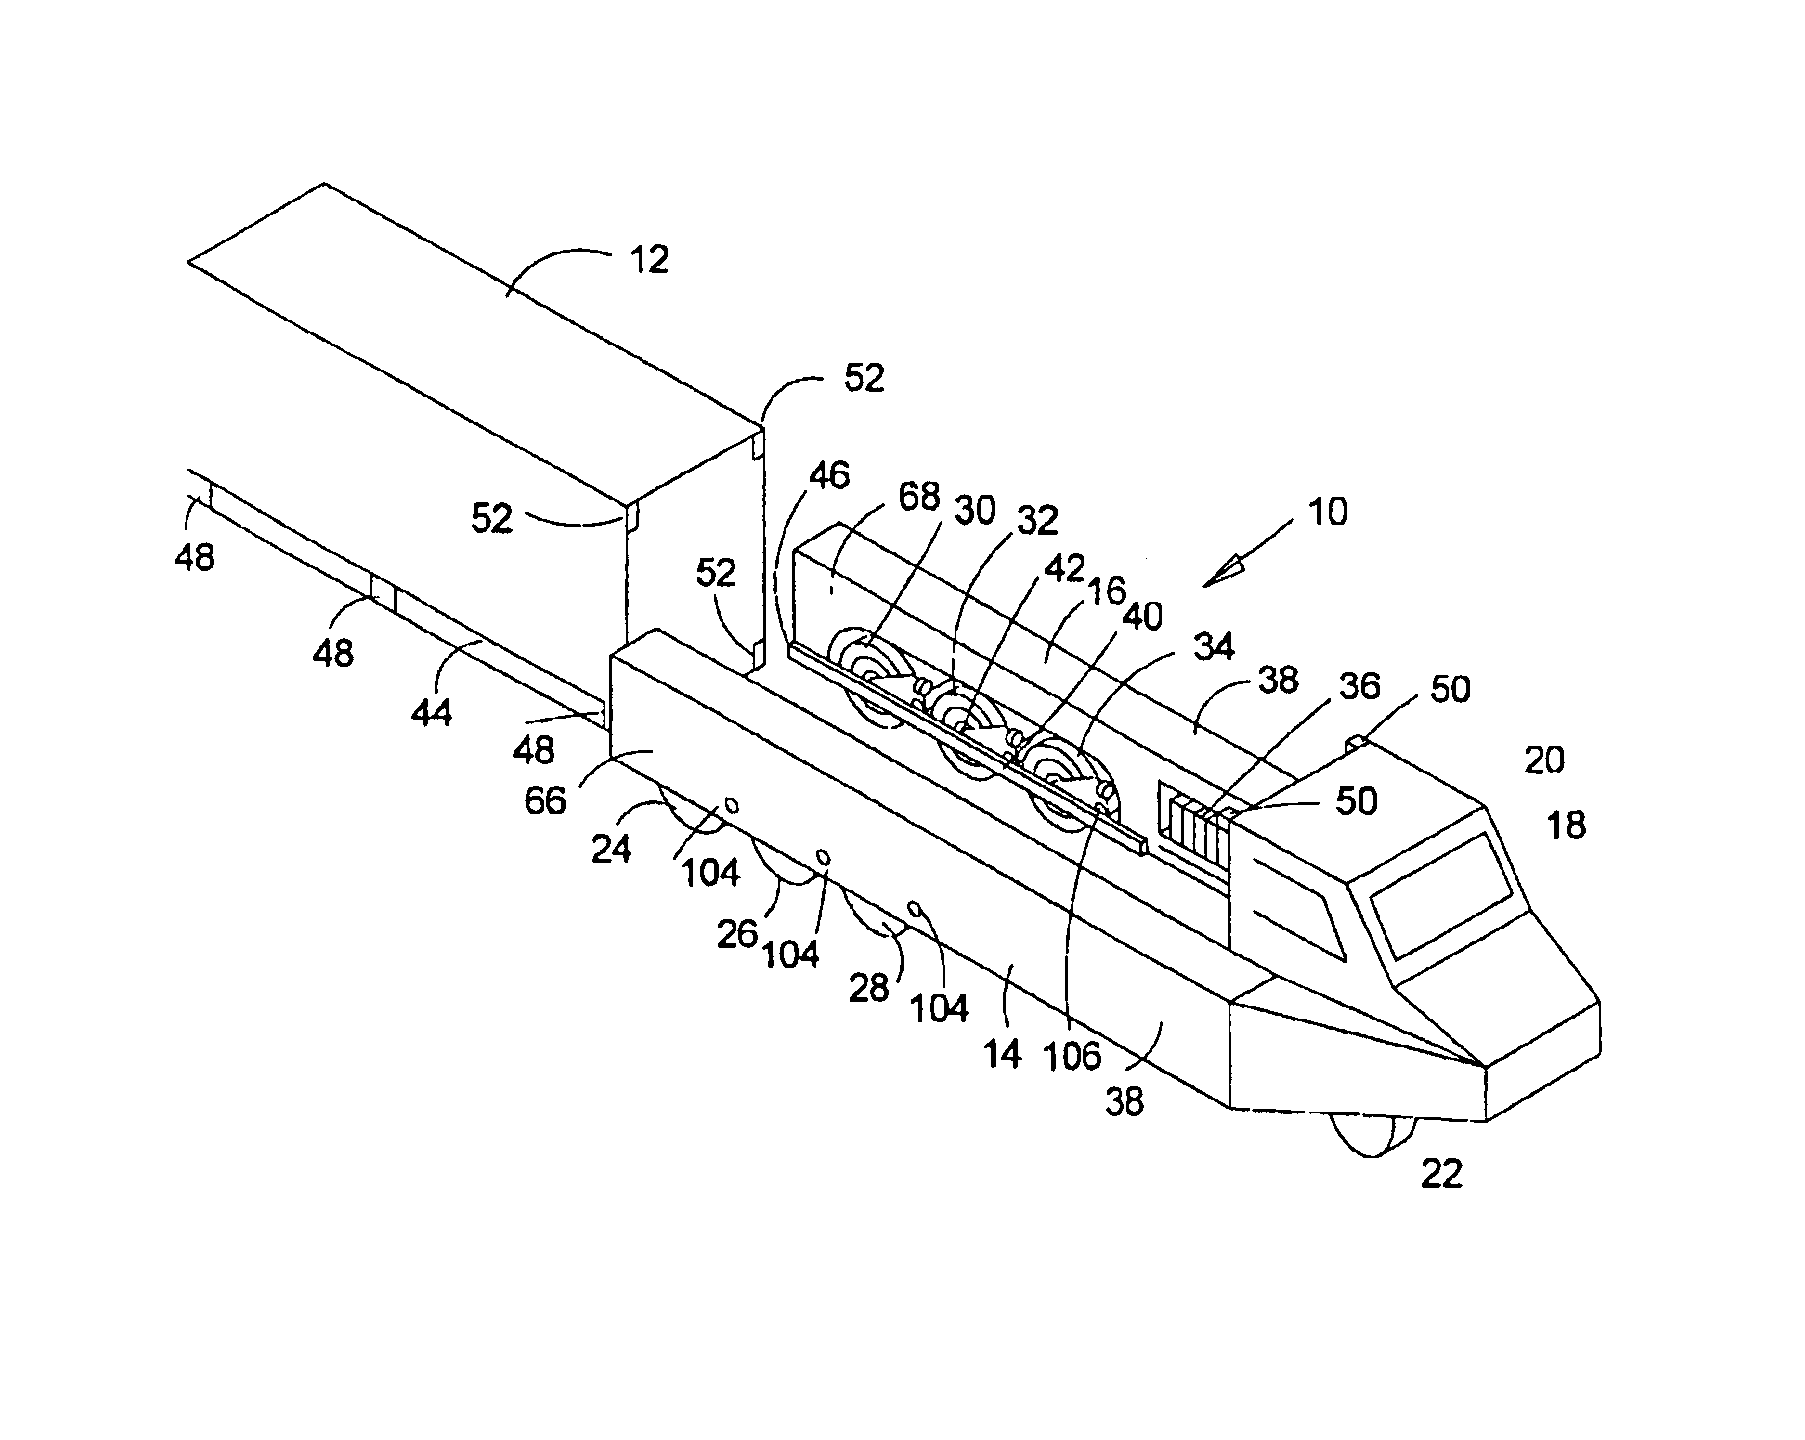 Self-loading vehicle for shipping containers